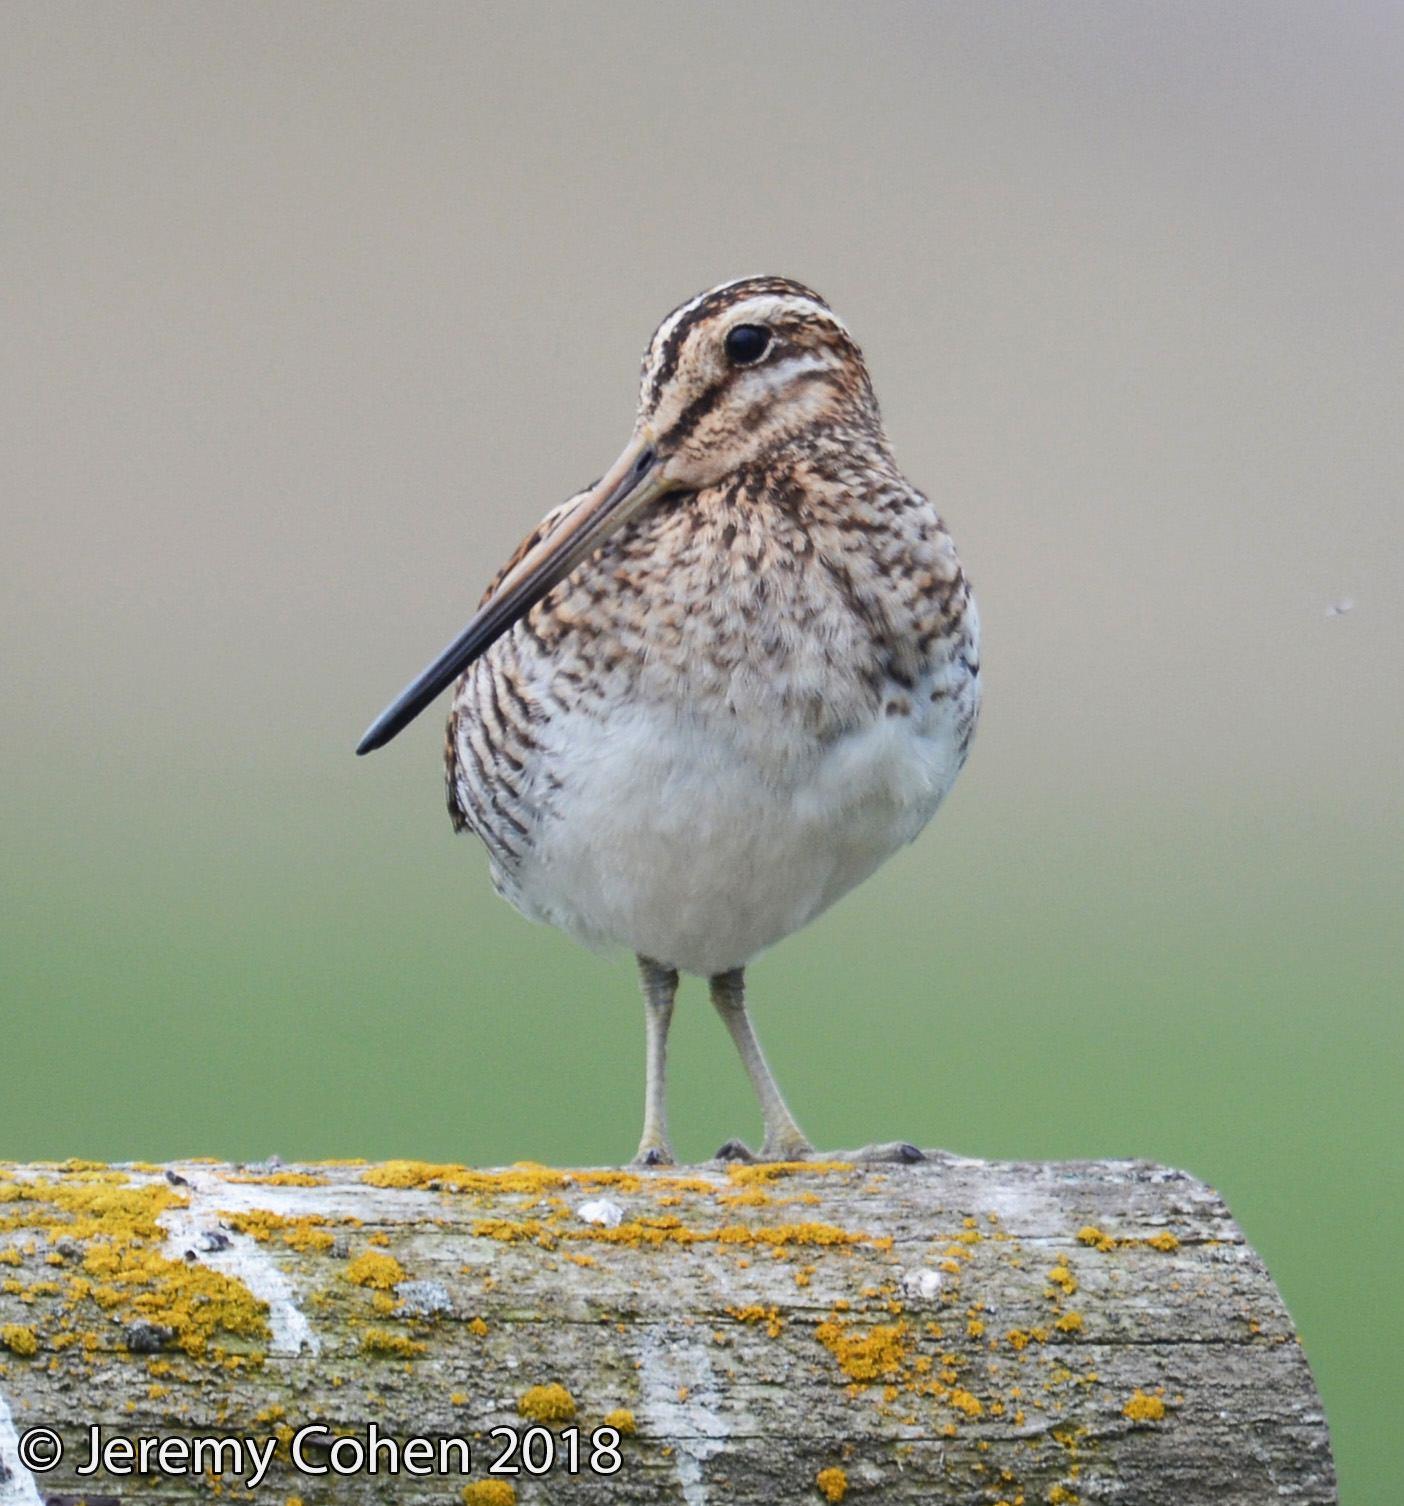 The Common Snipe is uncommonly beautiful.